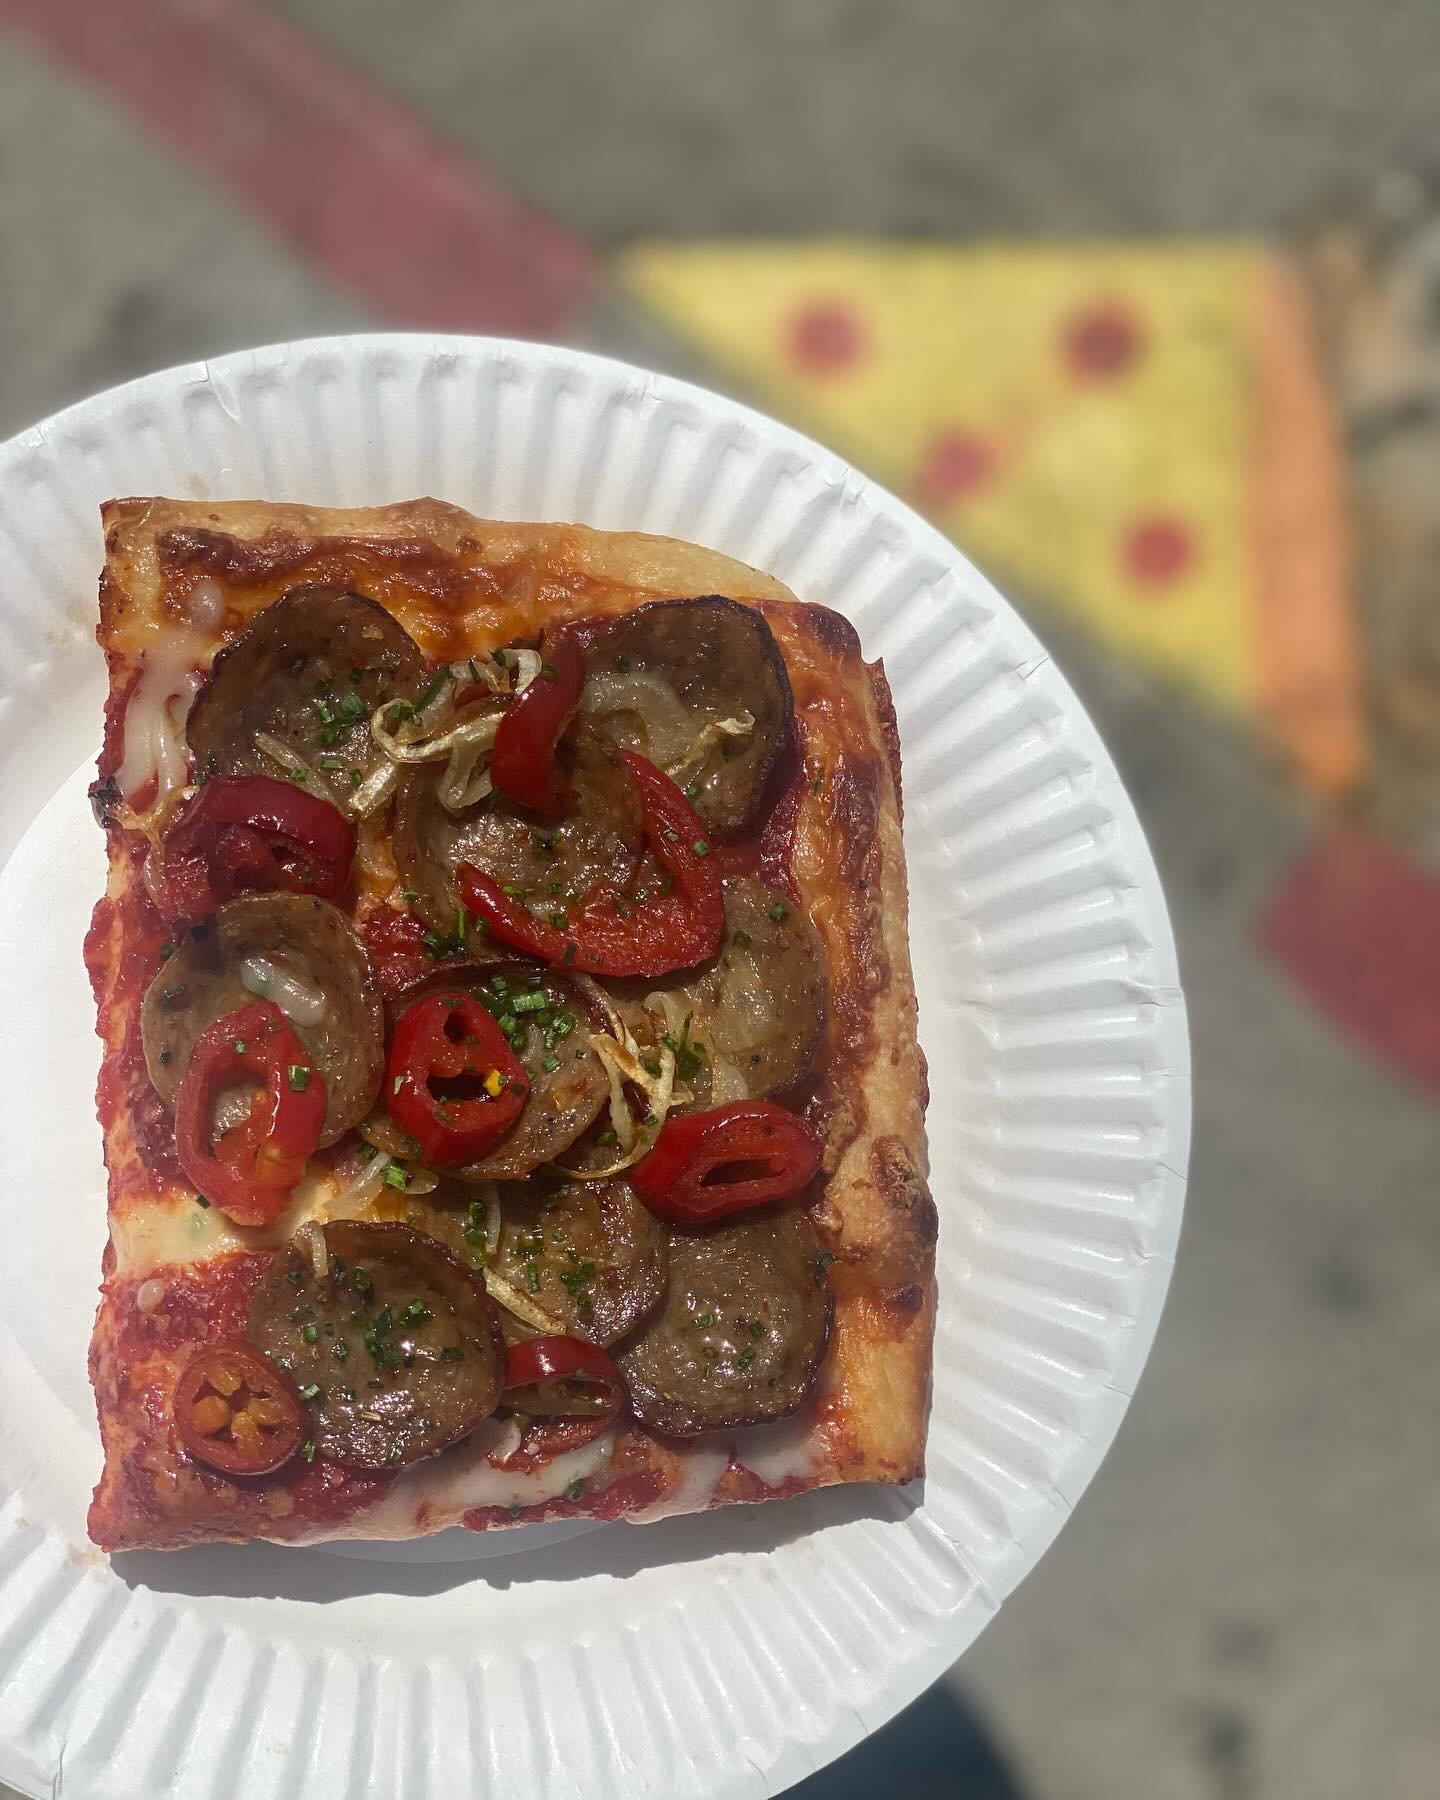 Slice of the week 
Sgt. Pepper - Ezzo sausage, onions, pickled peppers.

Along with our regular slices - Cheese, Pepperoni, Vodka.

Slices are available walk up only at the shop and are limited. They&rsquo;ve been going fast so make to get yours befo